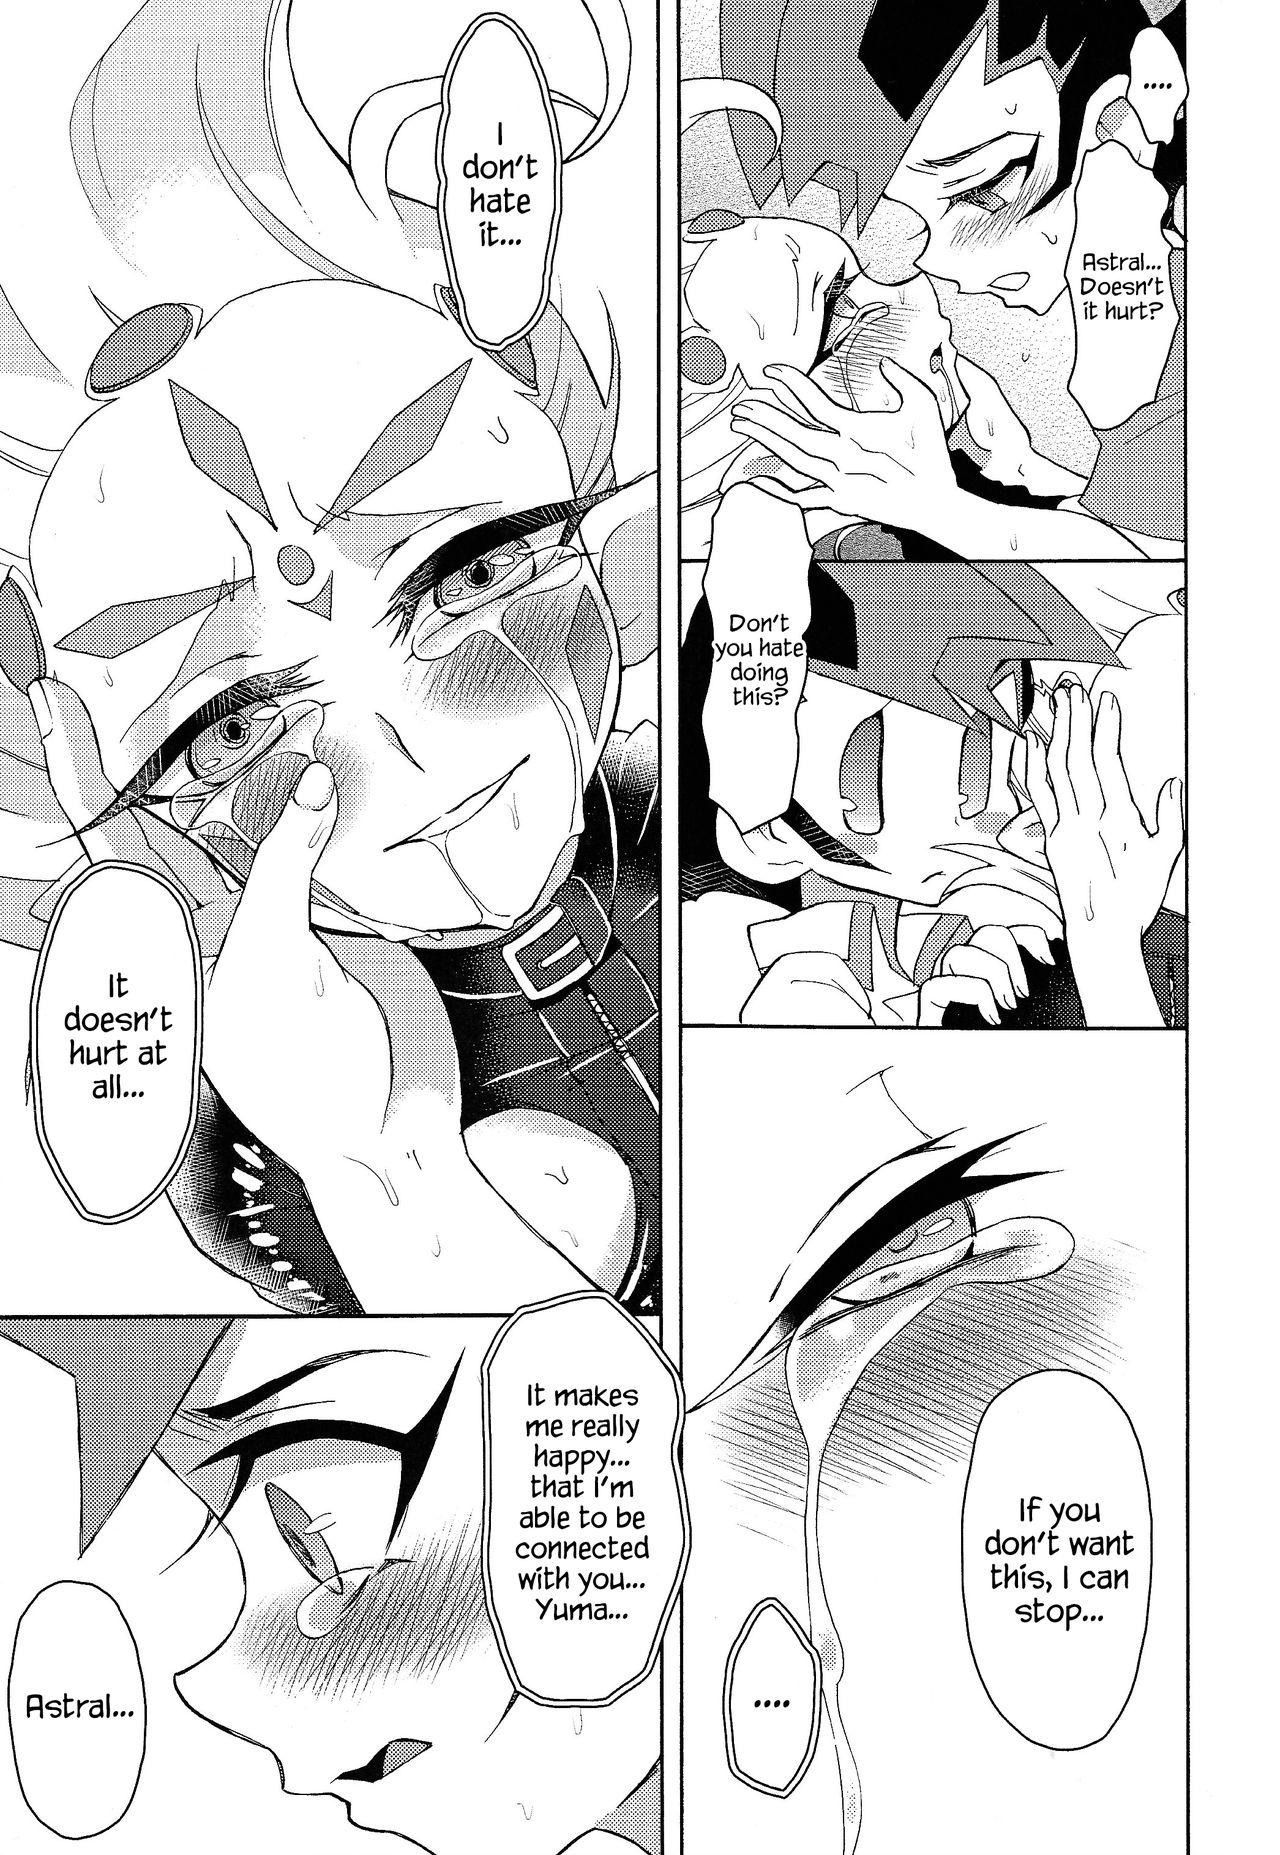 Russia LOVERS - Yu-gi-oh zexal Spying - Page 10